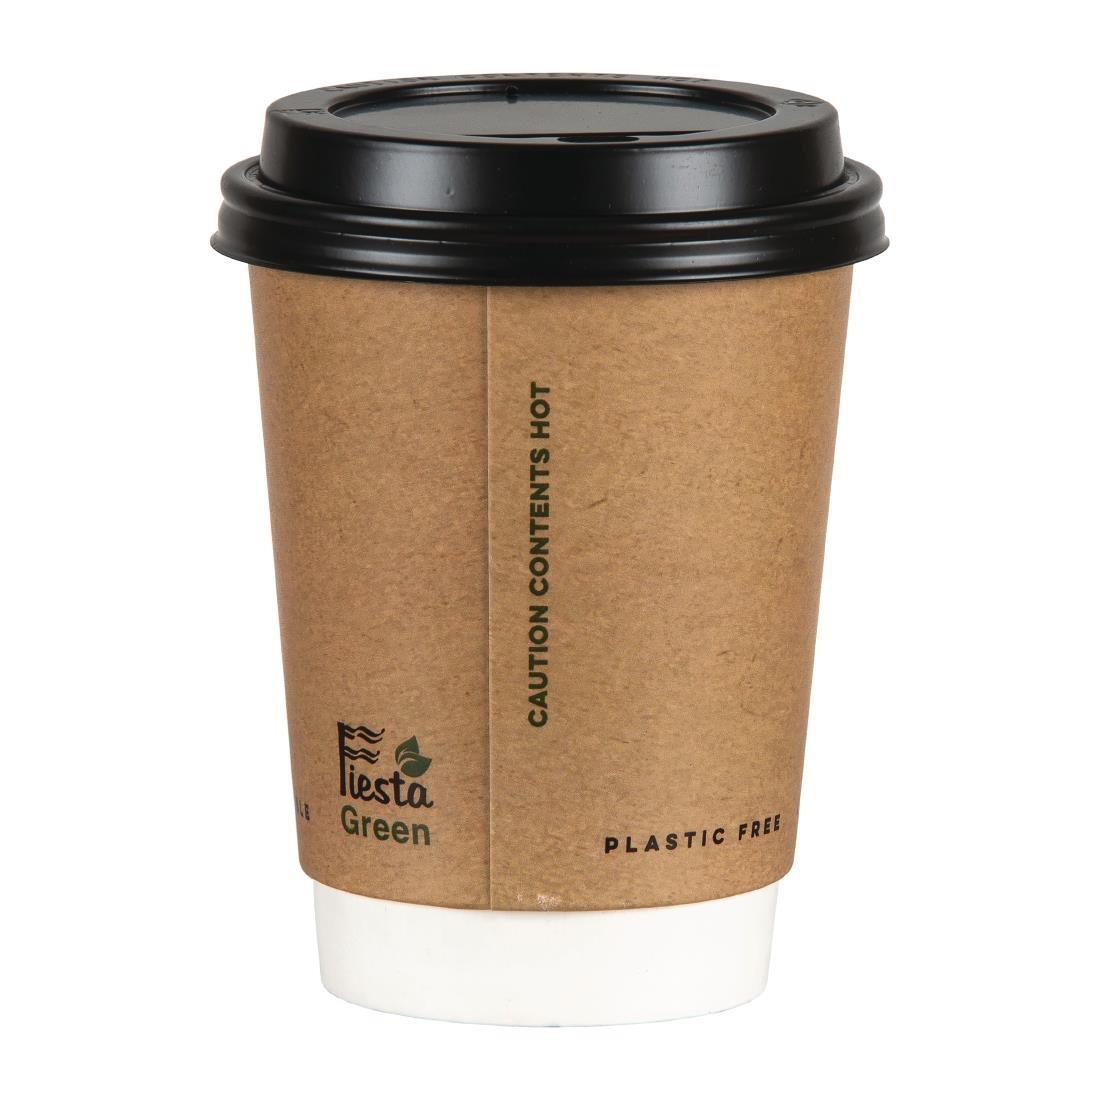 Fiesta Green Plastic-Free Compostable Hot Cups Double Wall 225ml / 8oz x 500 - FB951  - 6